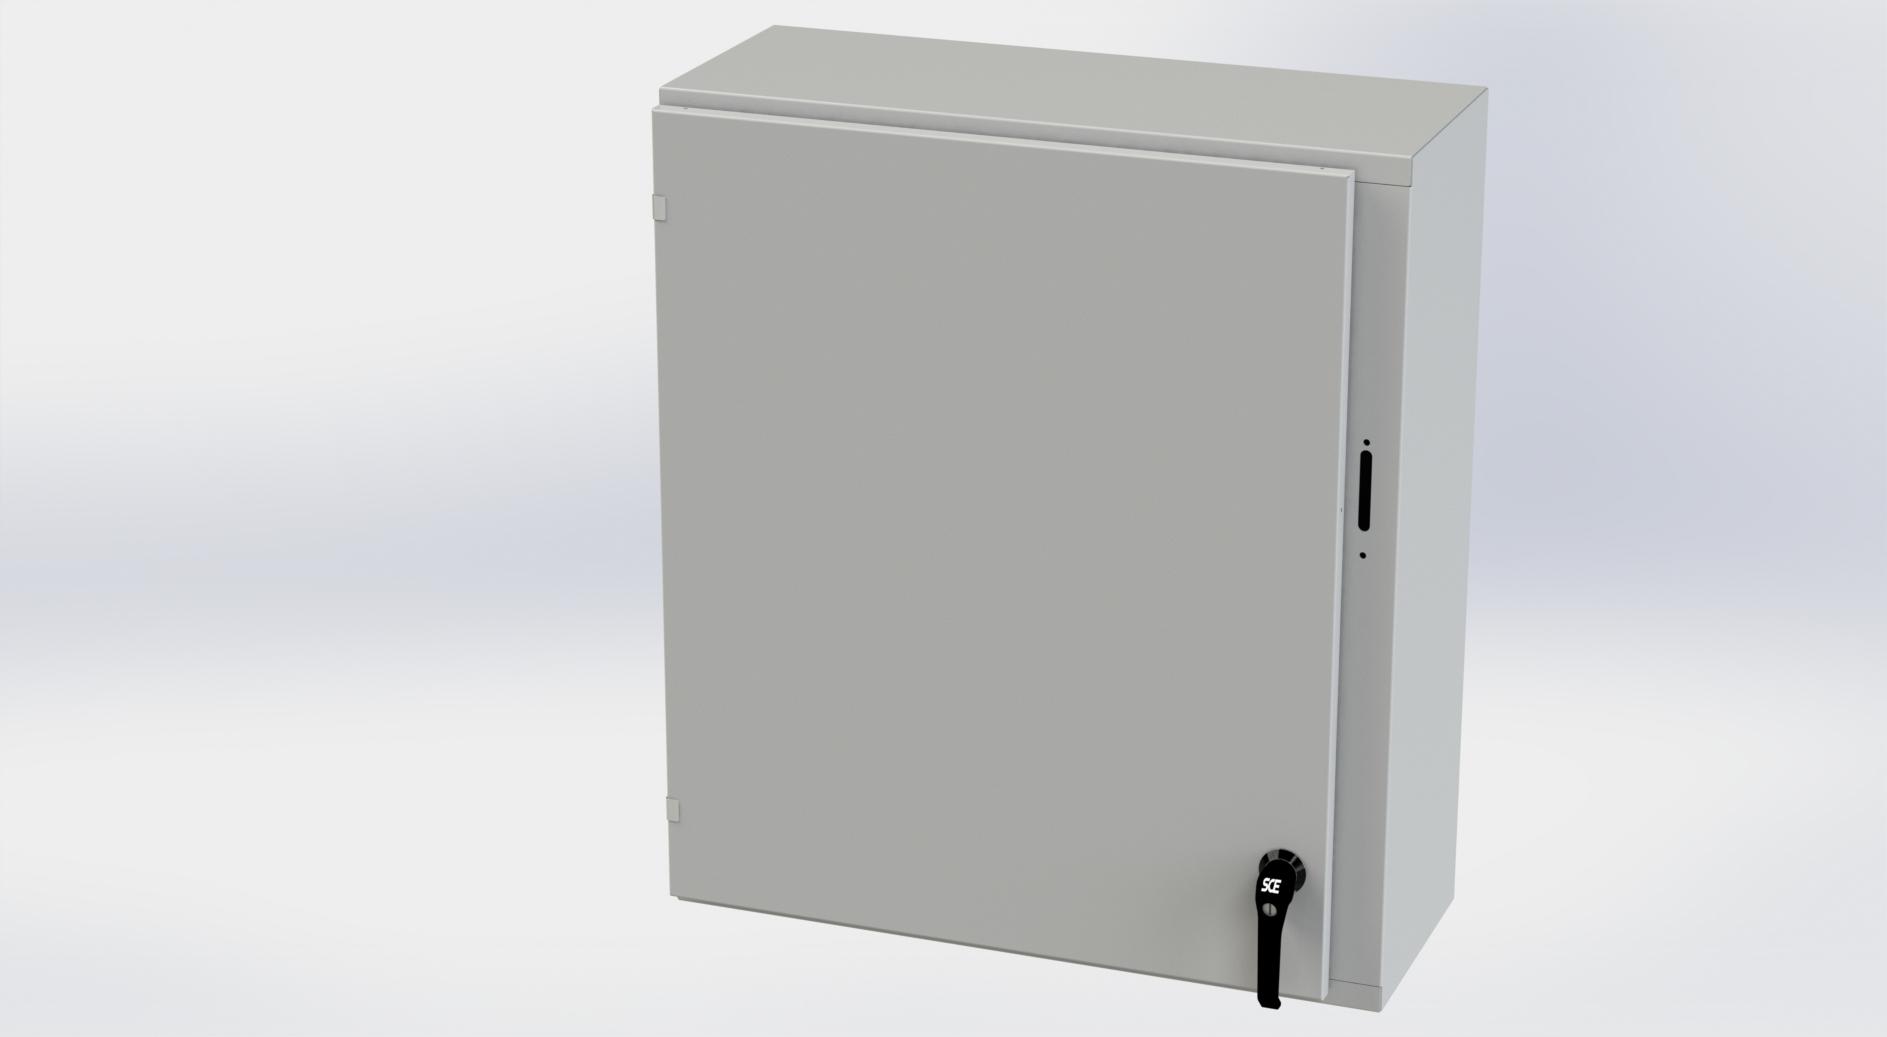 Saginaw Control SCE-36XEL3112LPLG XEL LP Enclosure, Height:36.00", Width:31.38", Depth:12.00", RAL 7035 gray powder coating inside and out. Optional sub-panels are powder coated white.